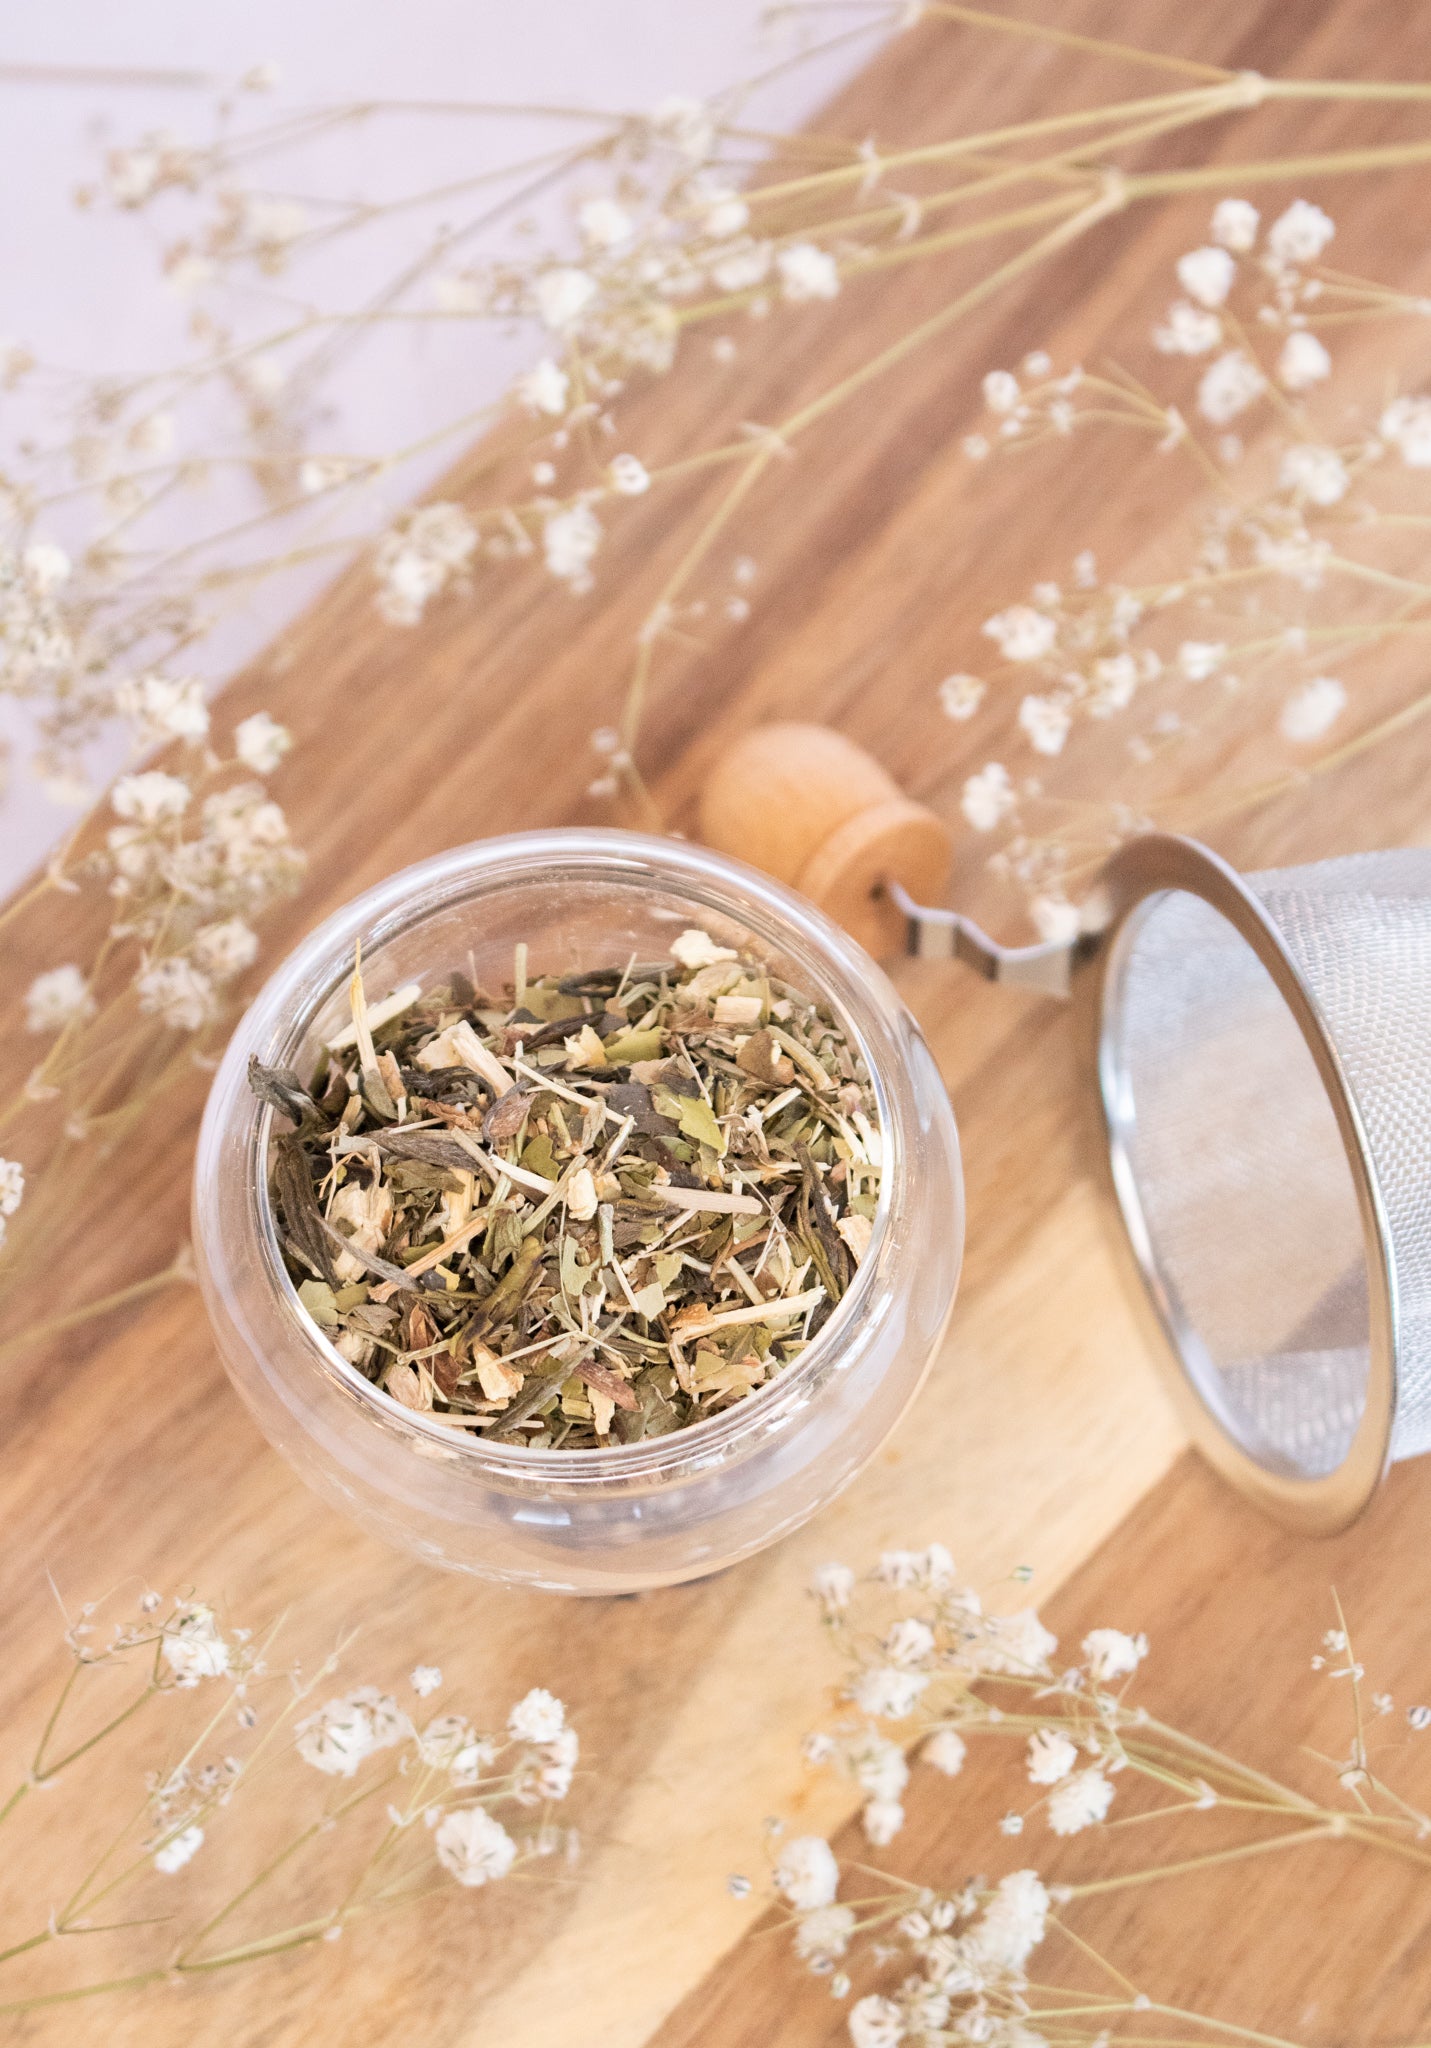 Our Mind Magic herbal tea blend has been formulated using organic Green Tea, Yerba Mate and a blend of powerful cognitive supporting herbs to promote focus, concentration and mental clarity. 